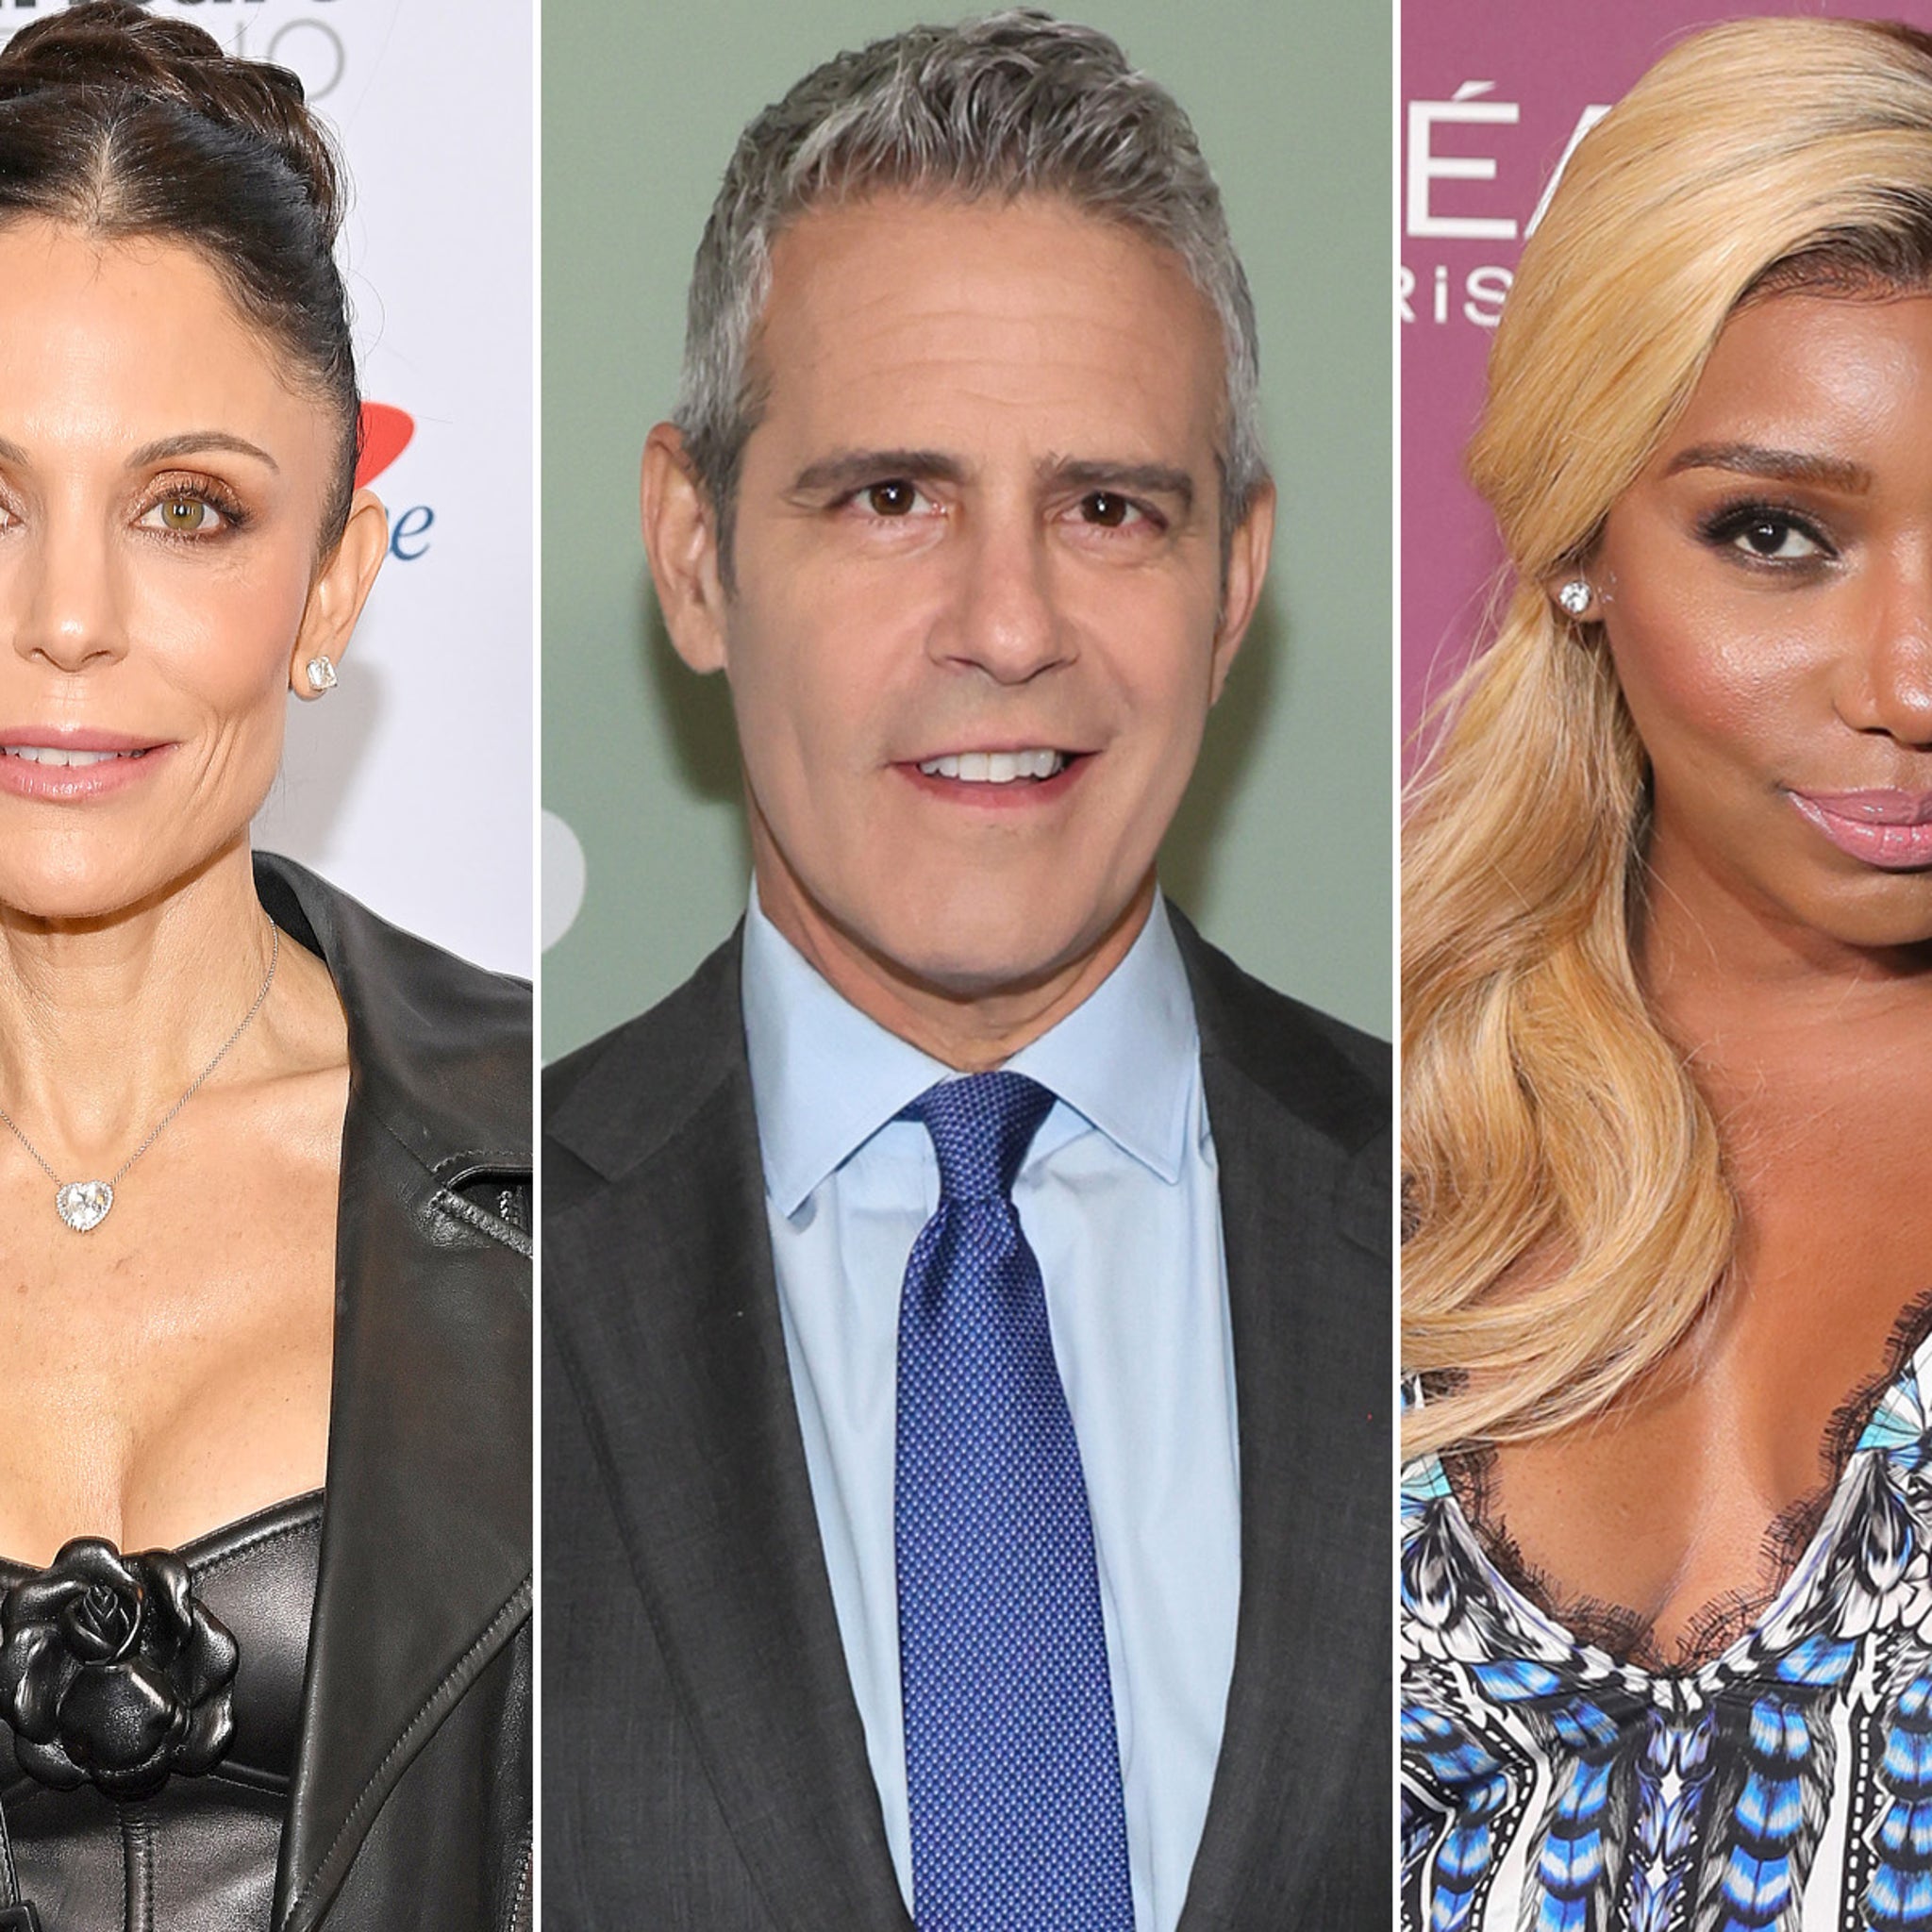 Bethenny Frankel Calls Out Andy Cohen For Asking Problematic Questions on WWHL